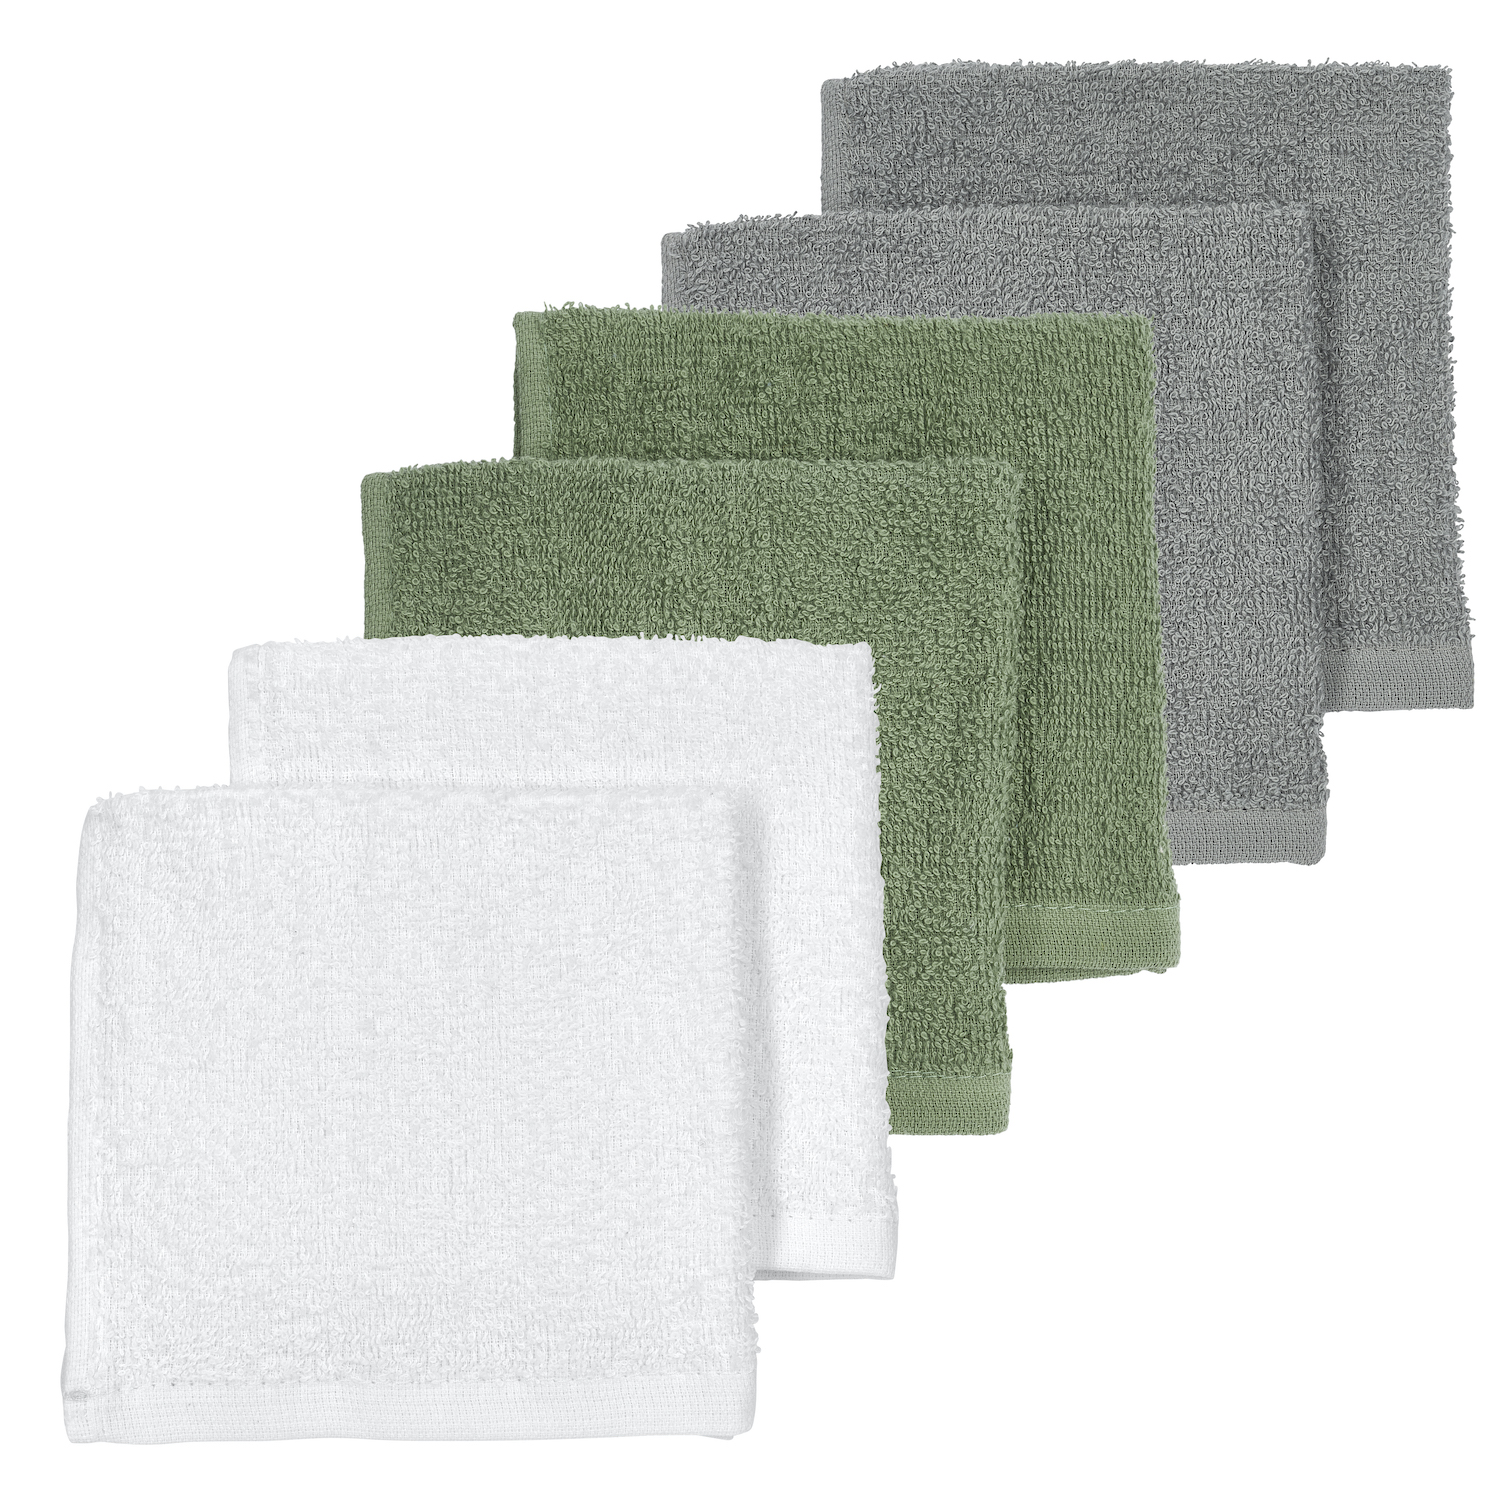 Basic Terry Face Cloths 6-pack  - White/Forest Green/Grey - 30x30cm